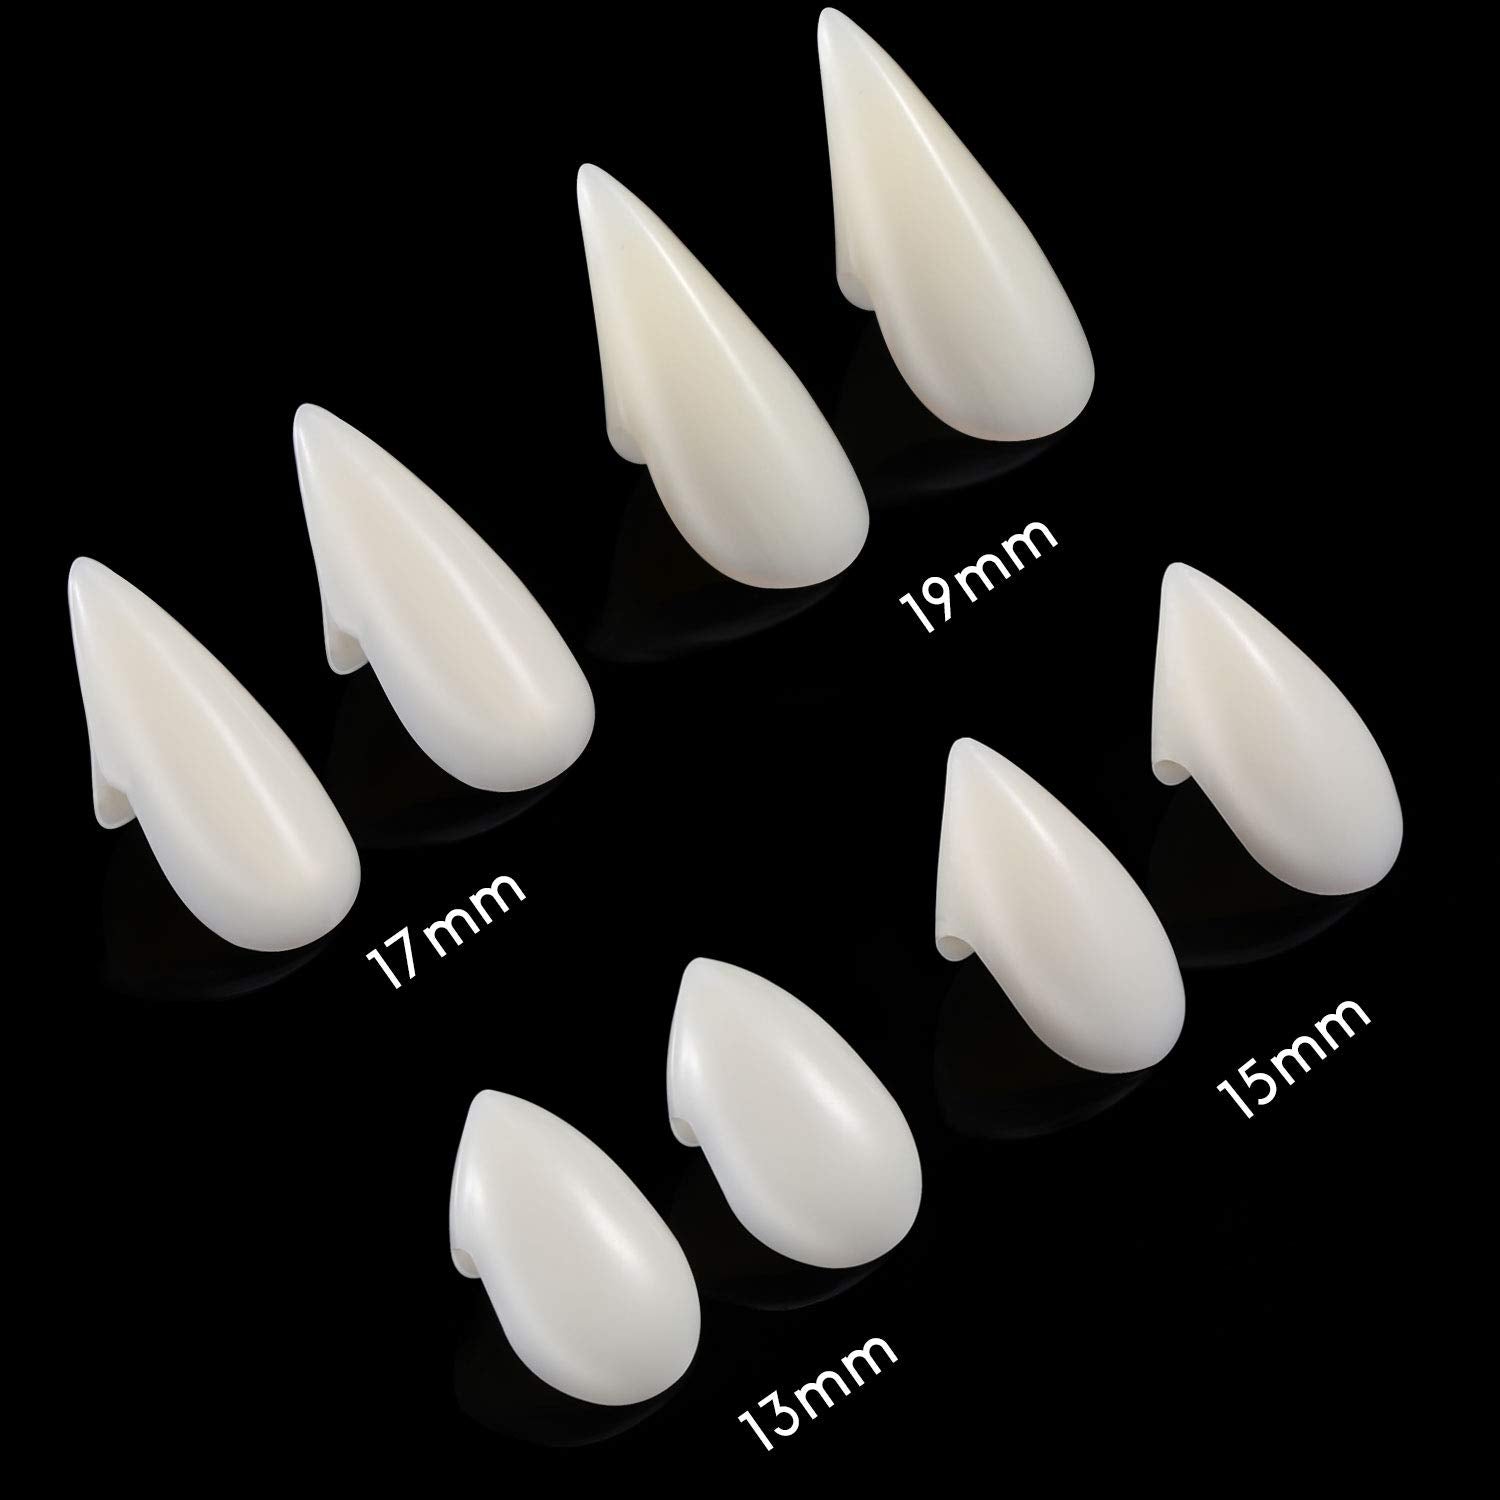 Zhanmai 12 Pairs Vampire Teeth Costume 4 Size Fangs Fake Teeth with 2 Teeth Pellets for Cosplay Party Props Halloween Party Fangs Favors